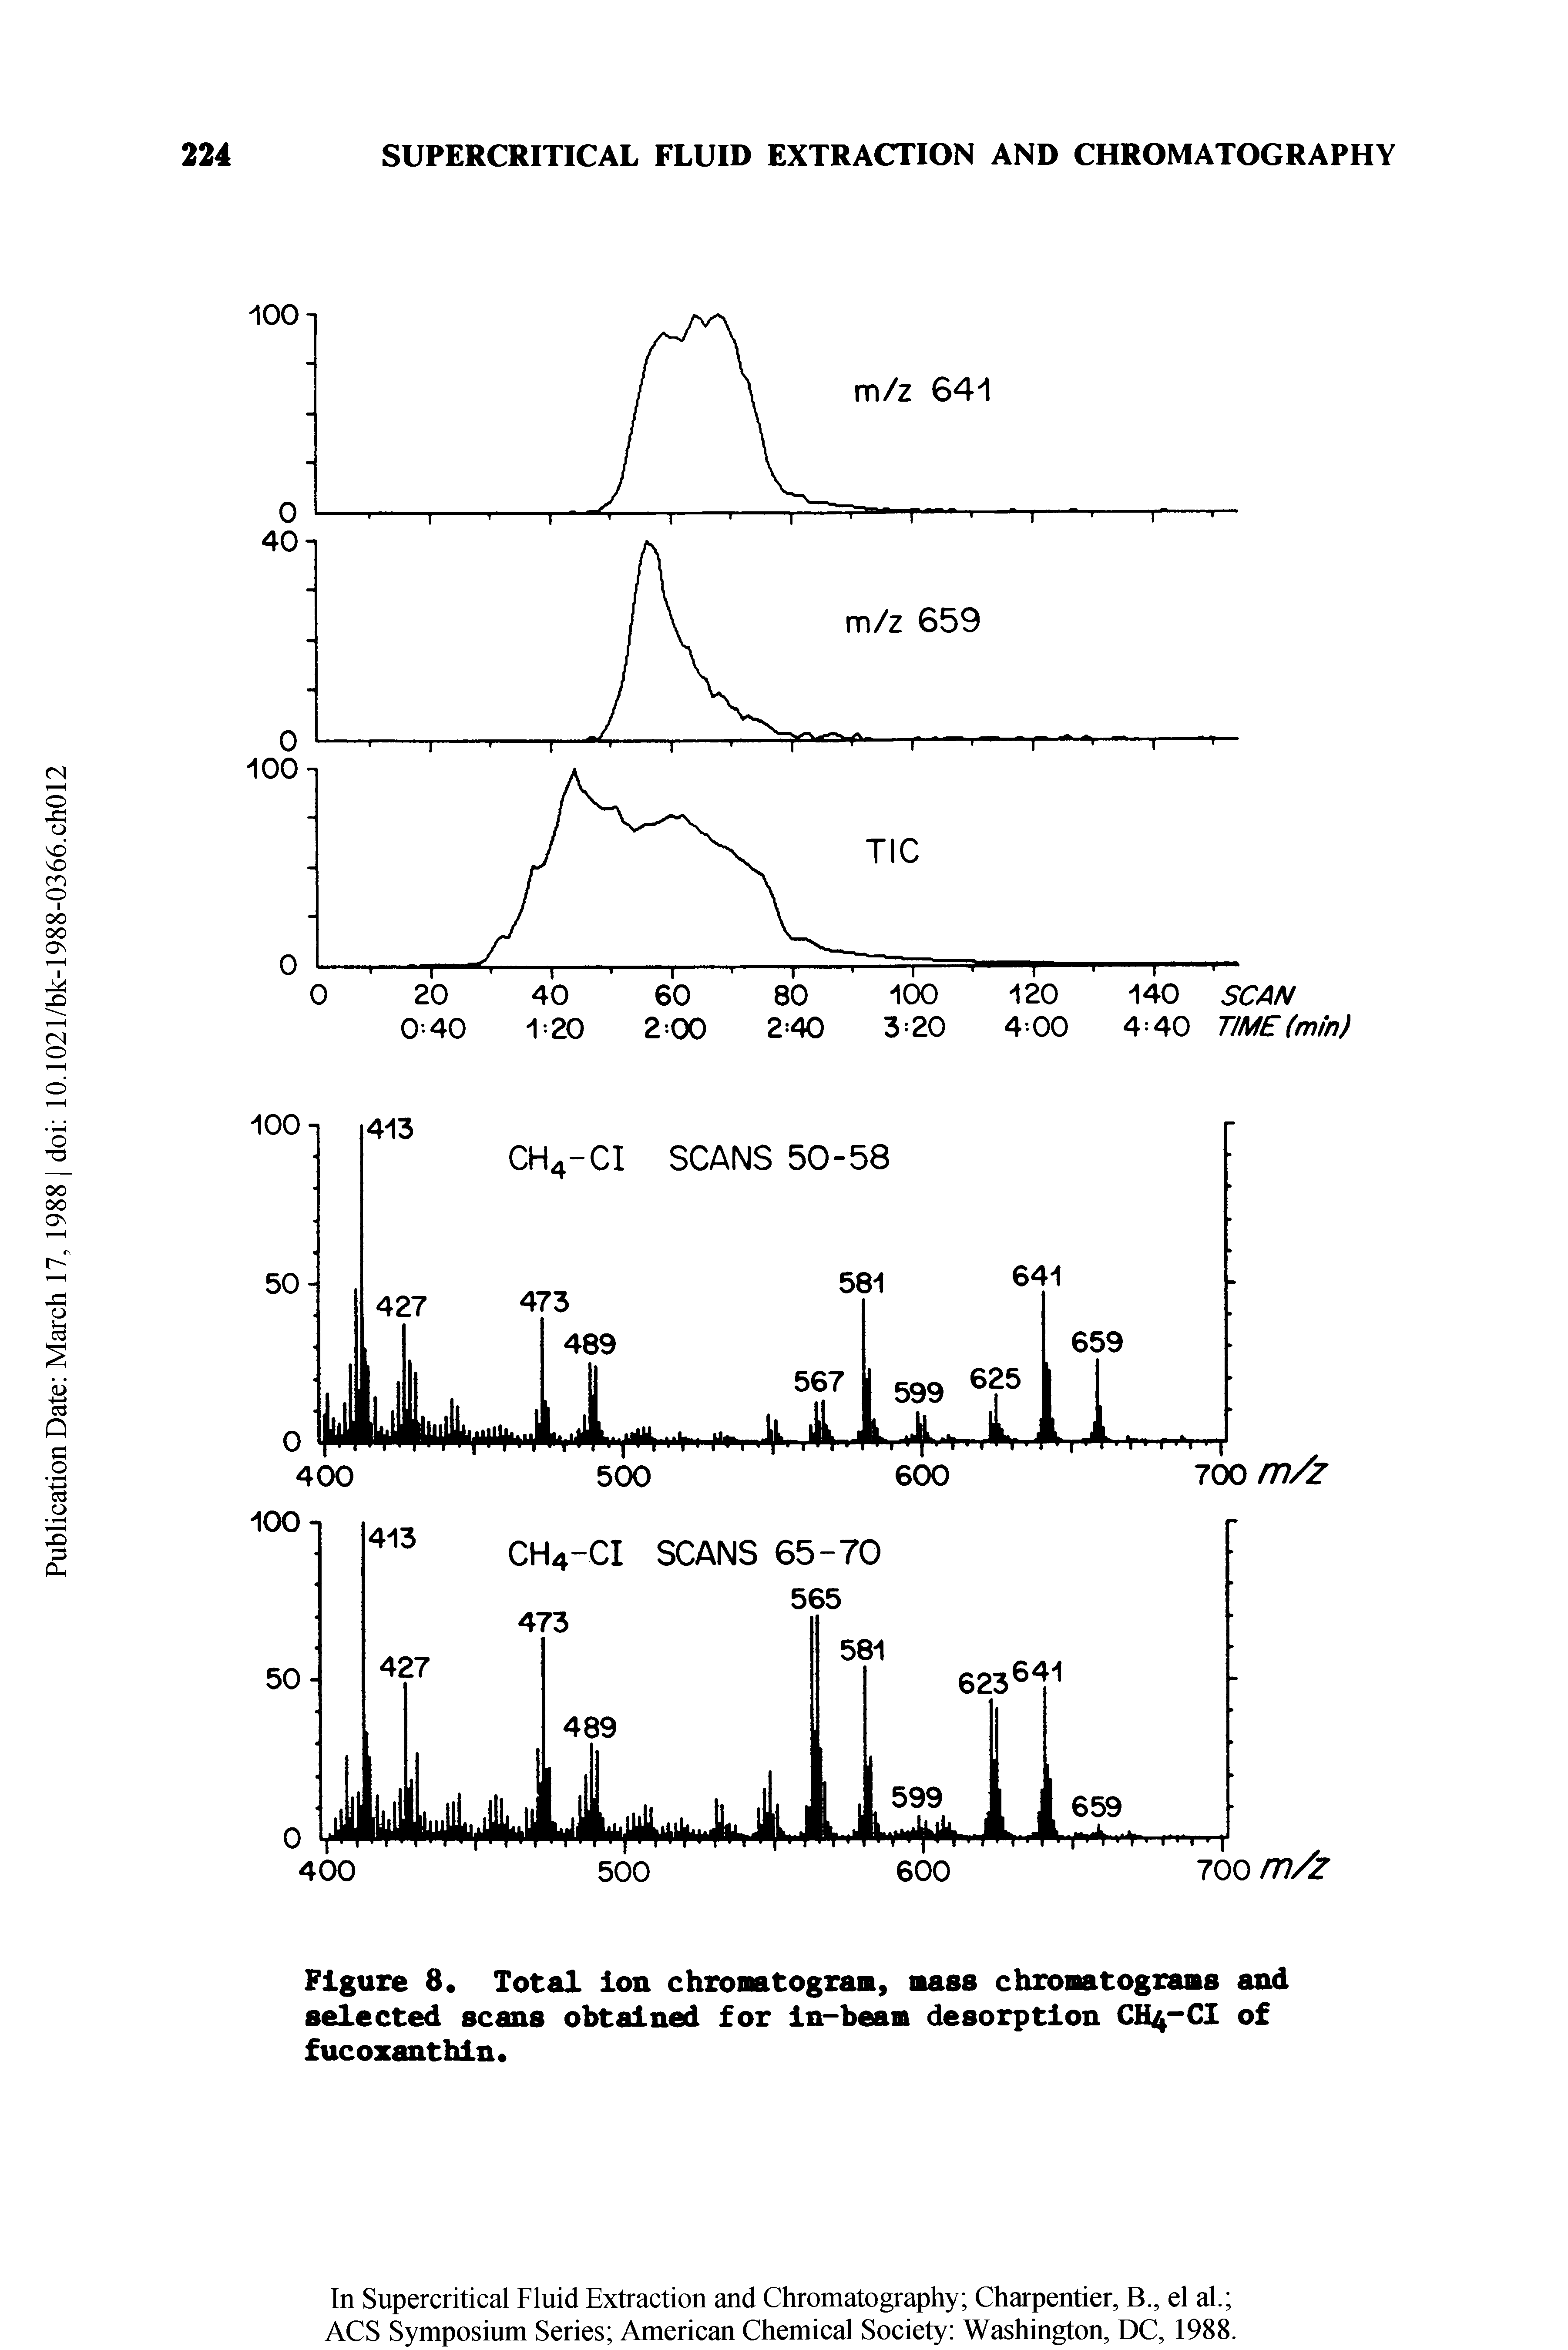 Figure 8. Total ion chromatogram, mass chromatograms aud selected scans obtained for In-beam desorption CH4-CI of fucoxanthln.